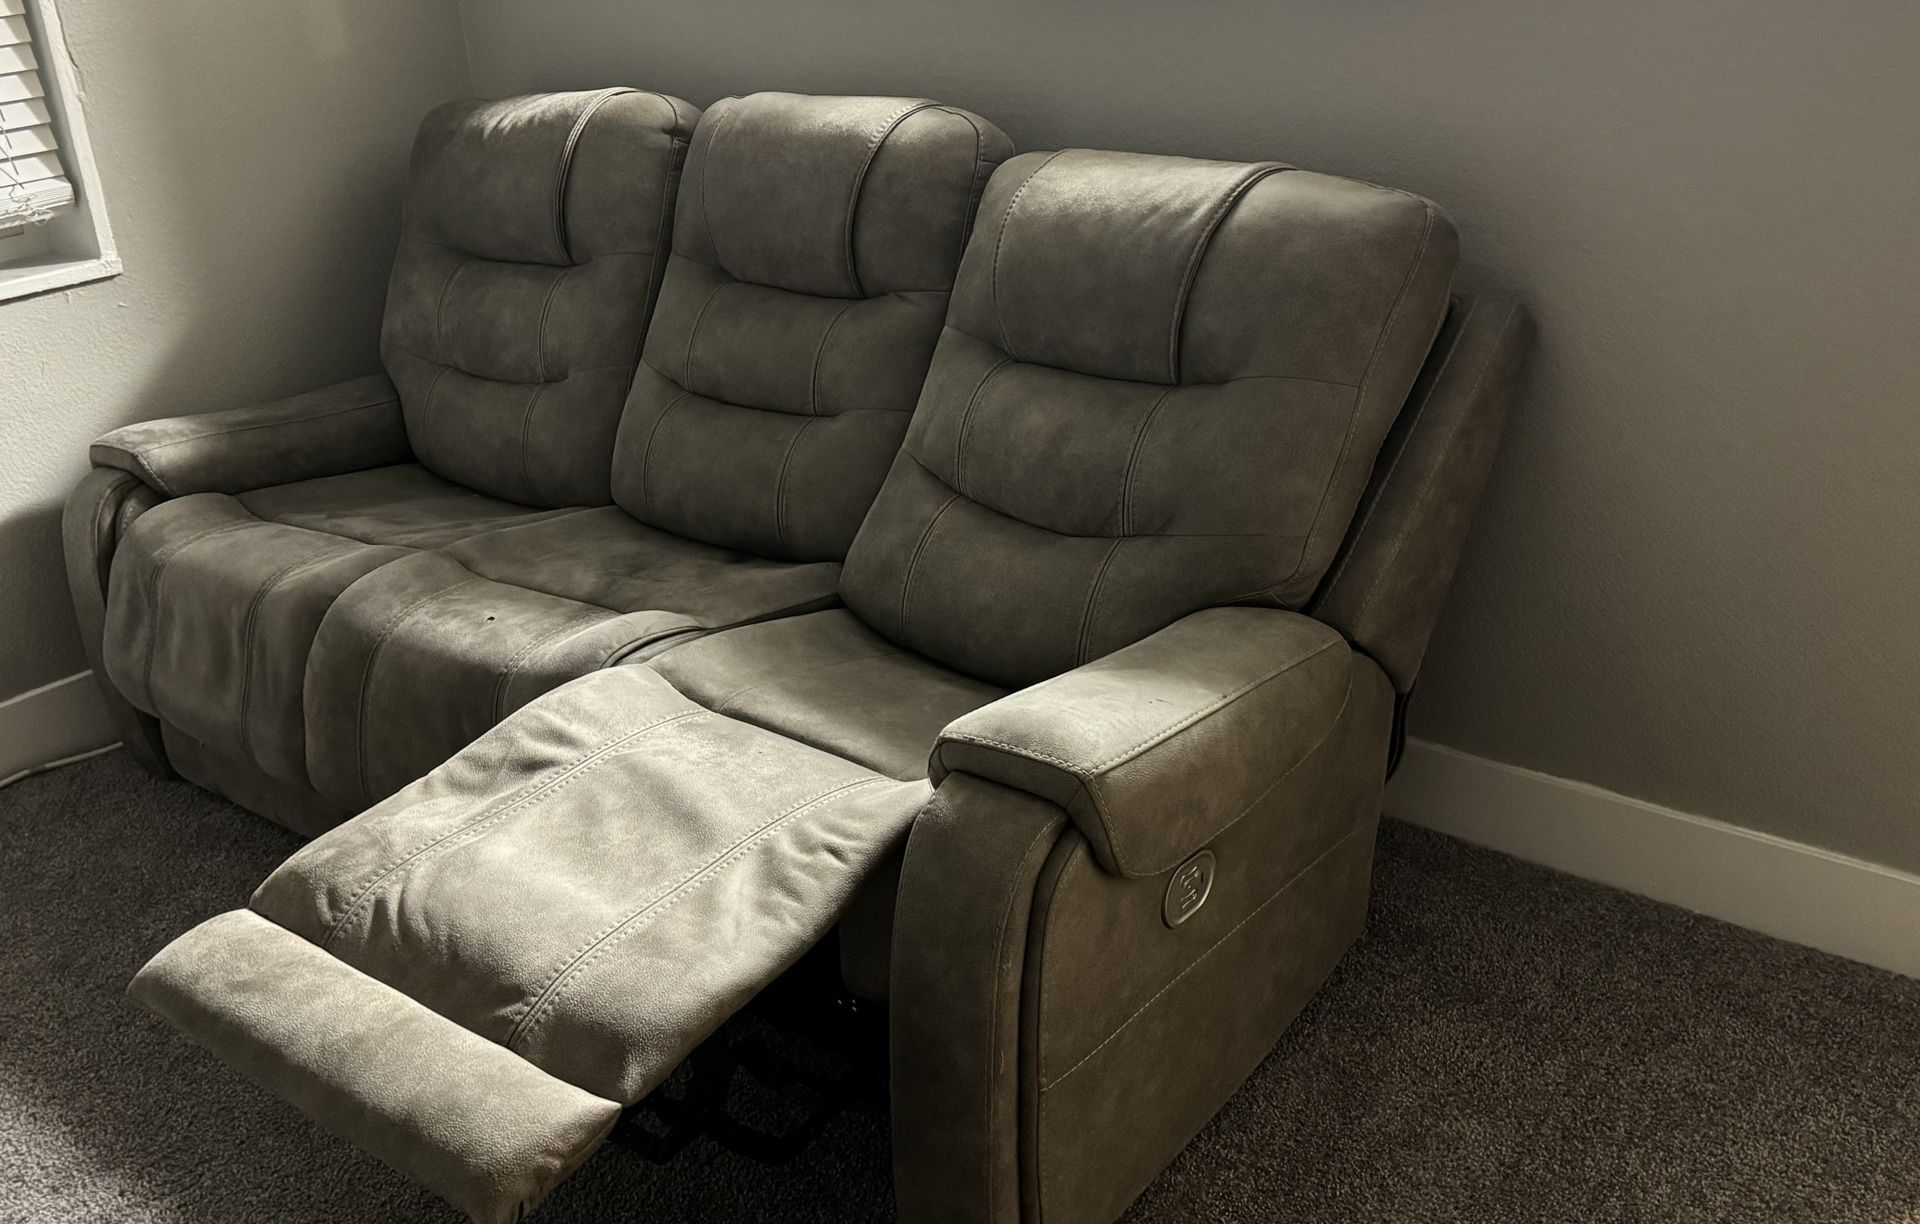 3 Seater Recliner Couch USB PLUG IN!! 